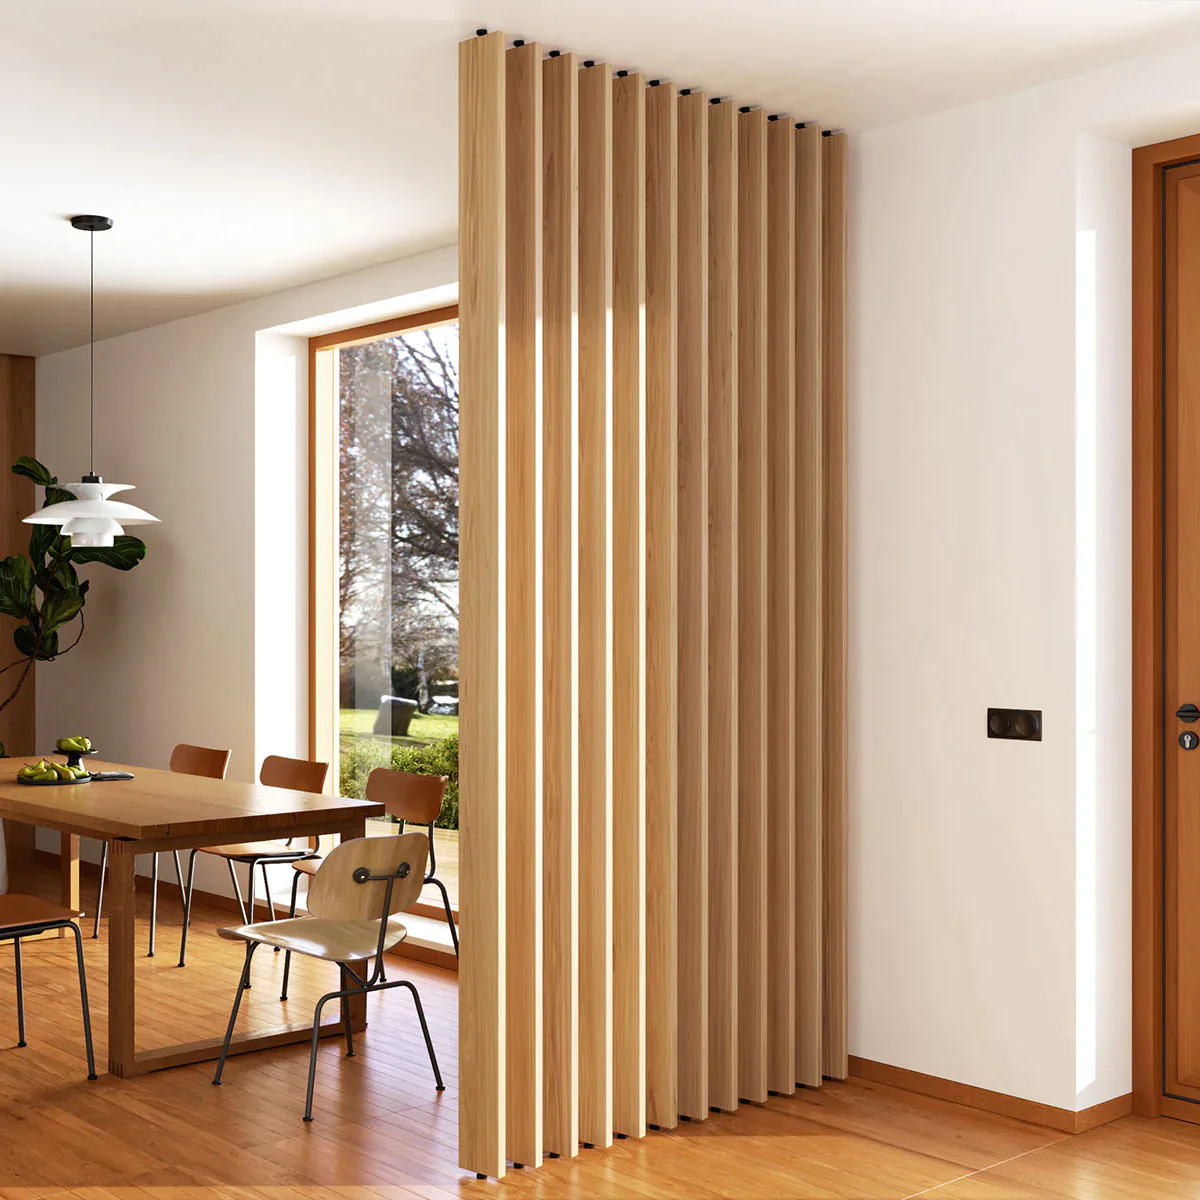 Room Divider Ideas for Increased  Functionality